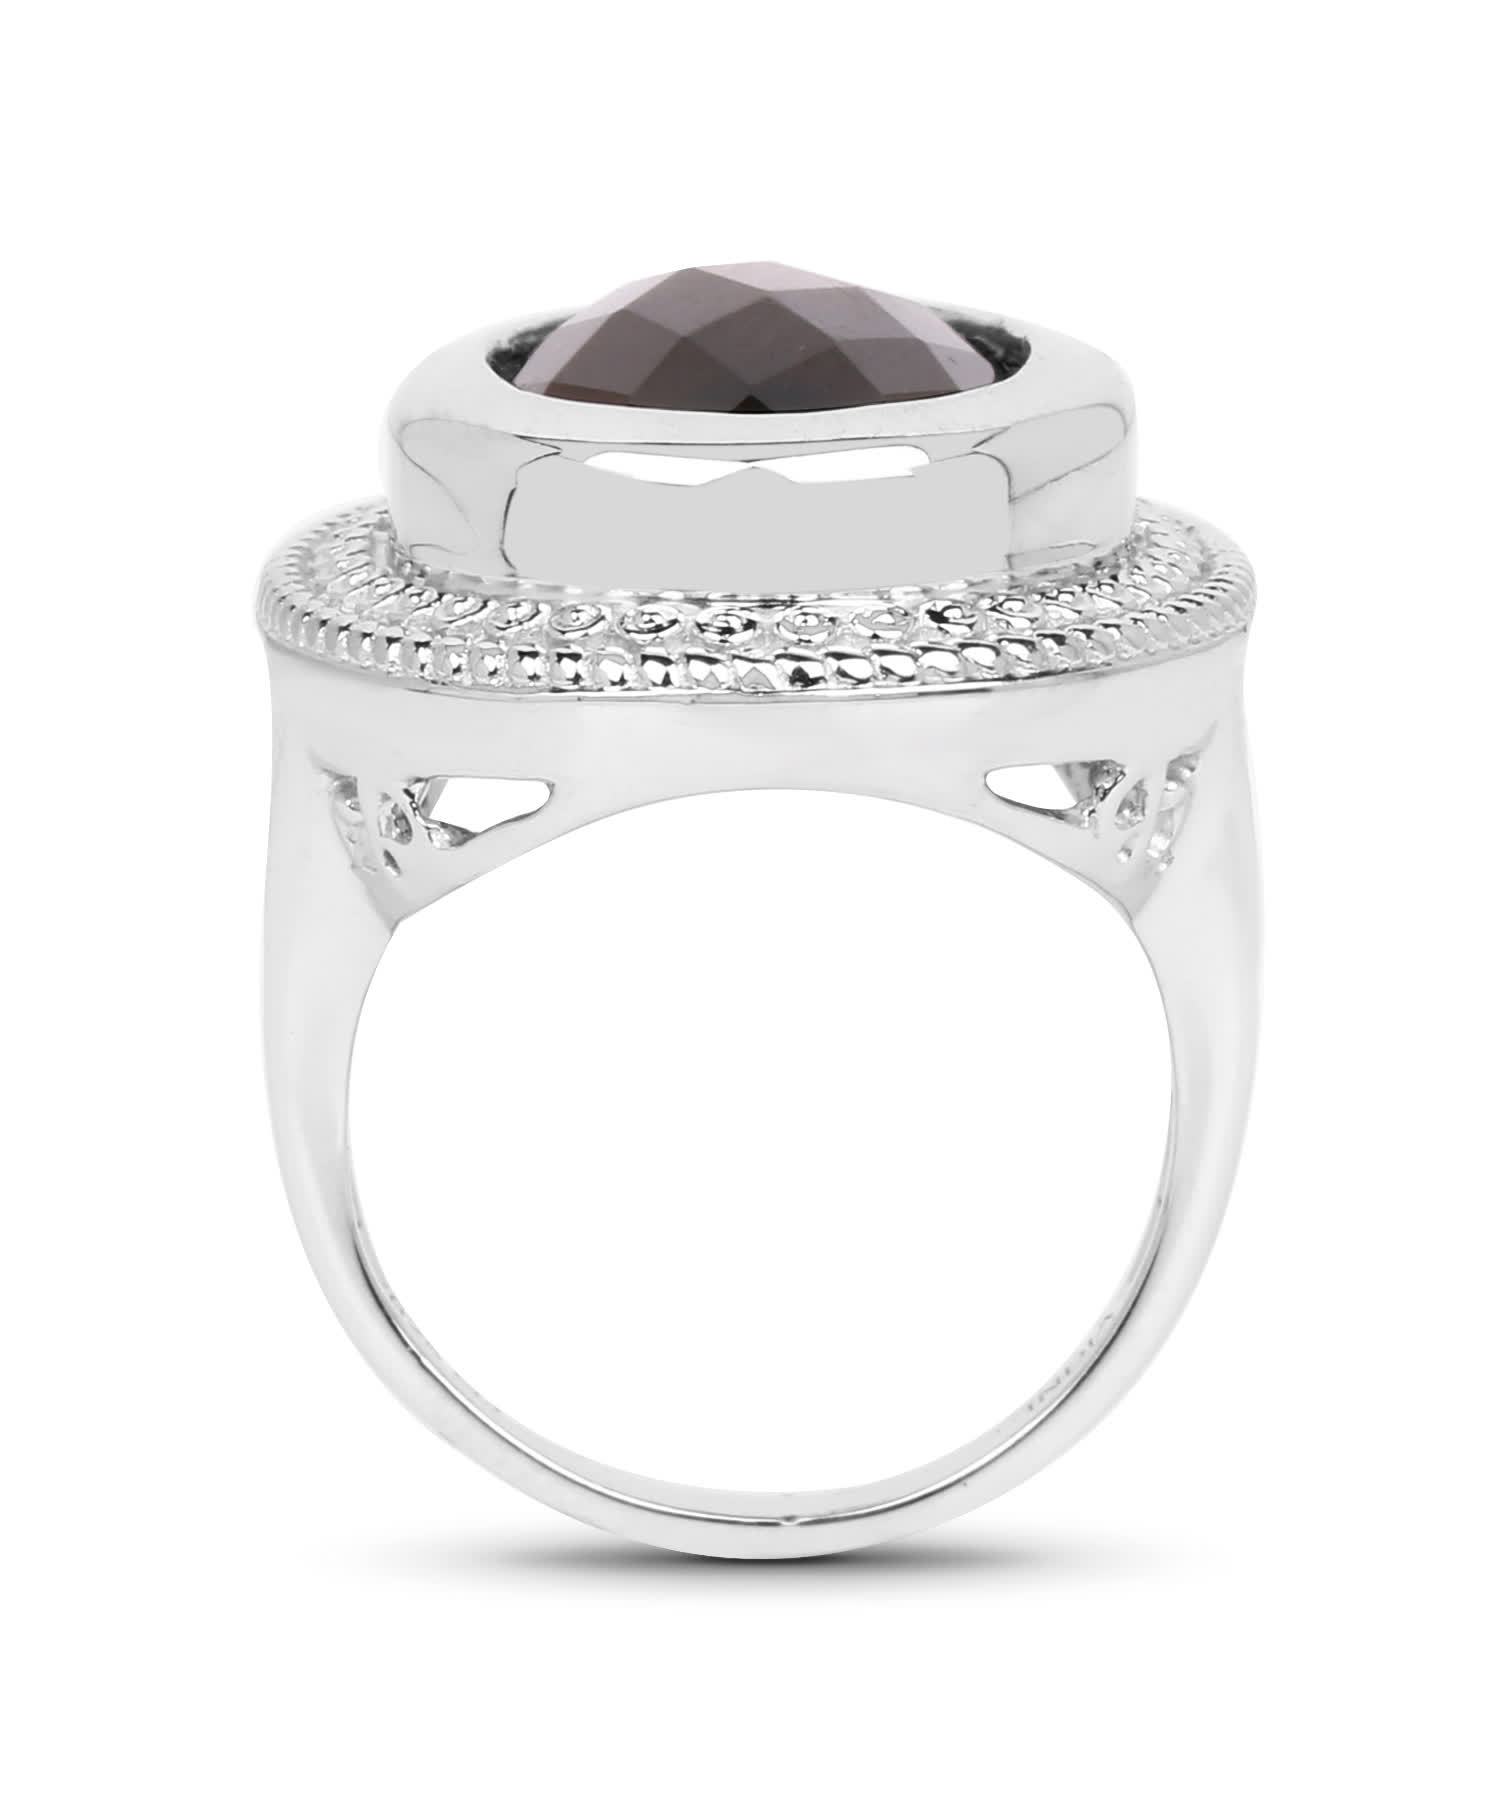 7.90ctw Natural Smoky Quartz Rhodium Plated 925 Sterling Silver Oval Cocktail Ring View 2